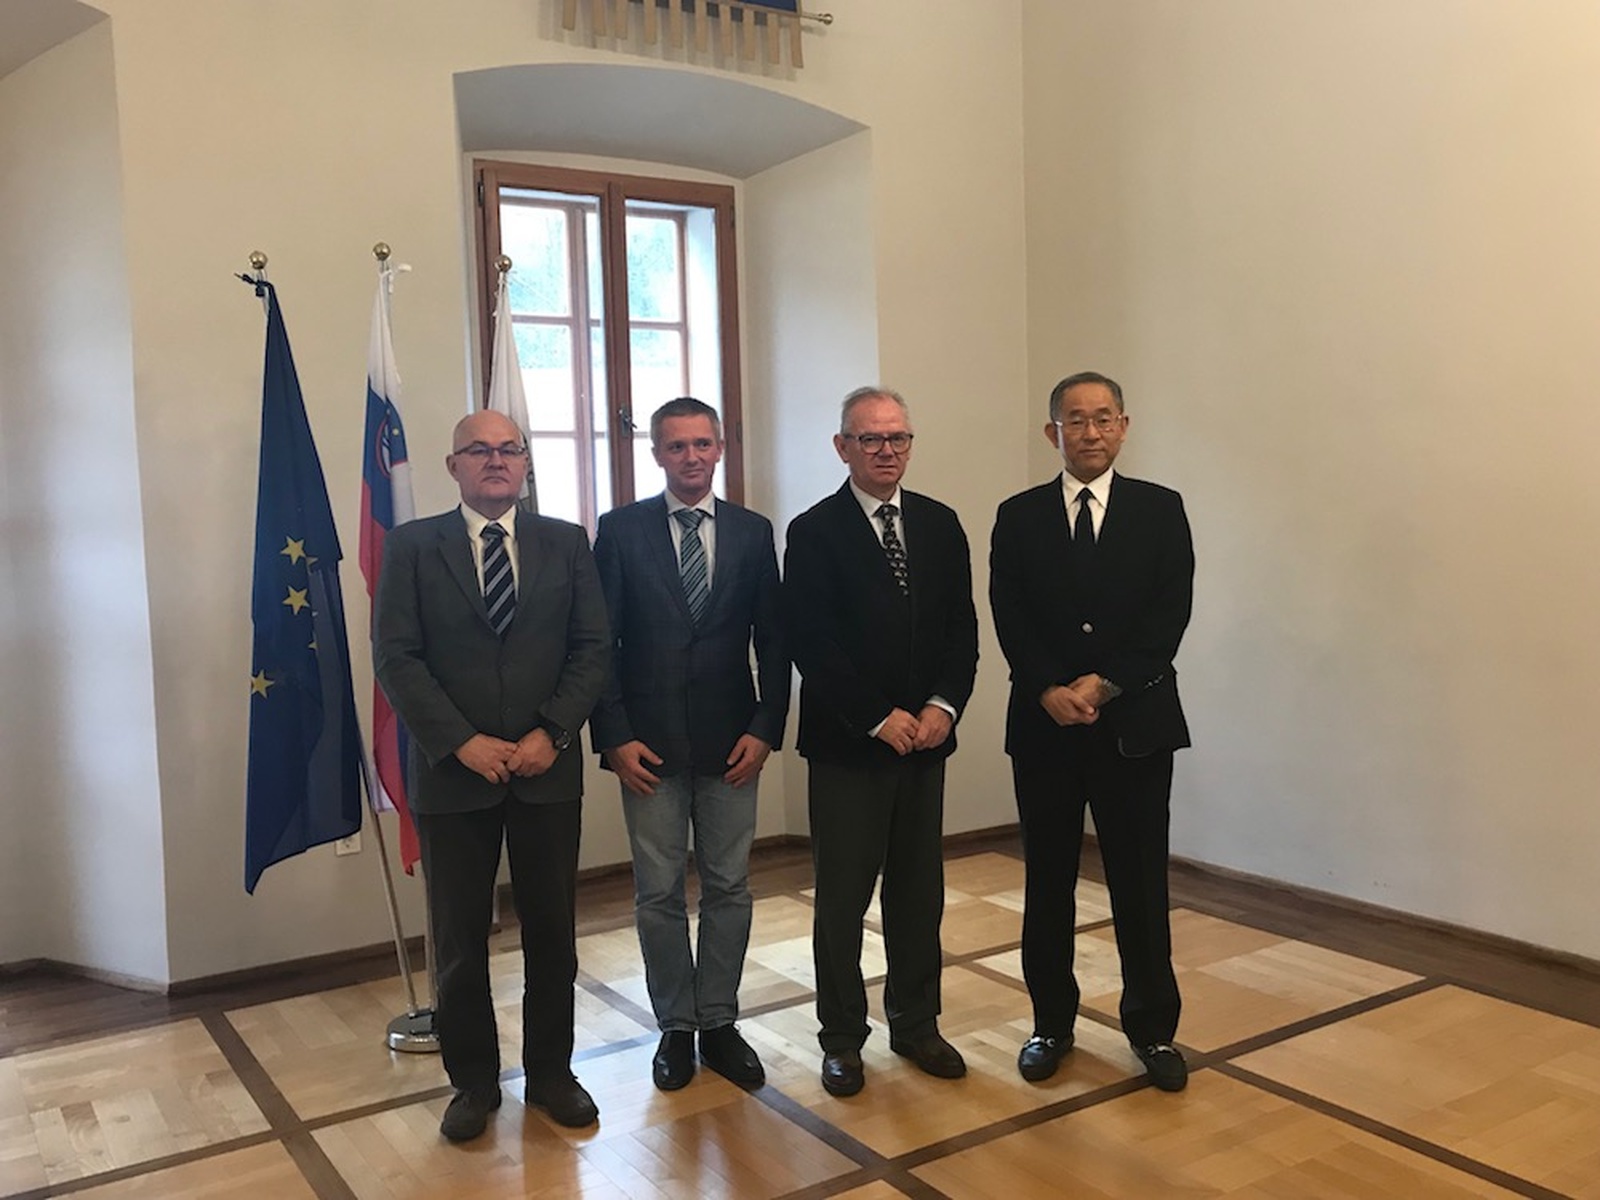 From left to right: Vice-rector for Research and Arts, Prof. Dr. Gvido Bratina, Dean of the School of Science and the Head of the Center for Atmospheric Research, Prof. Dr. Samo Stanič, Rector of the University of Nova Gorica, Prof. Dr. Danilo Zavrtanik and Japanese Ambassador to Slovenia, his Excellency, Masaharu Yoshida.